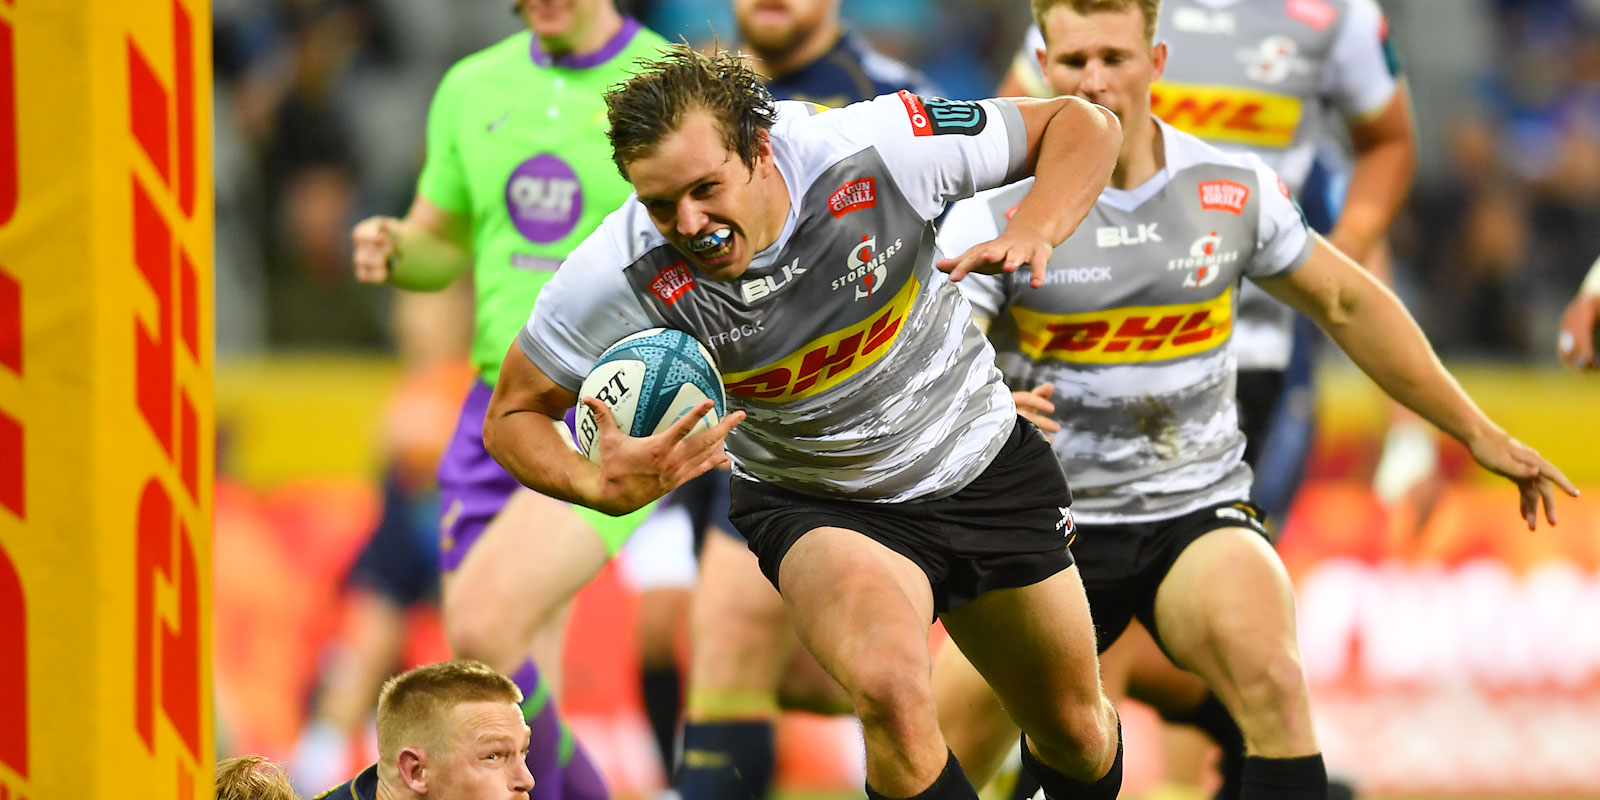 Dan du Plessis on his way to score for the DHL Stormers.